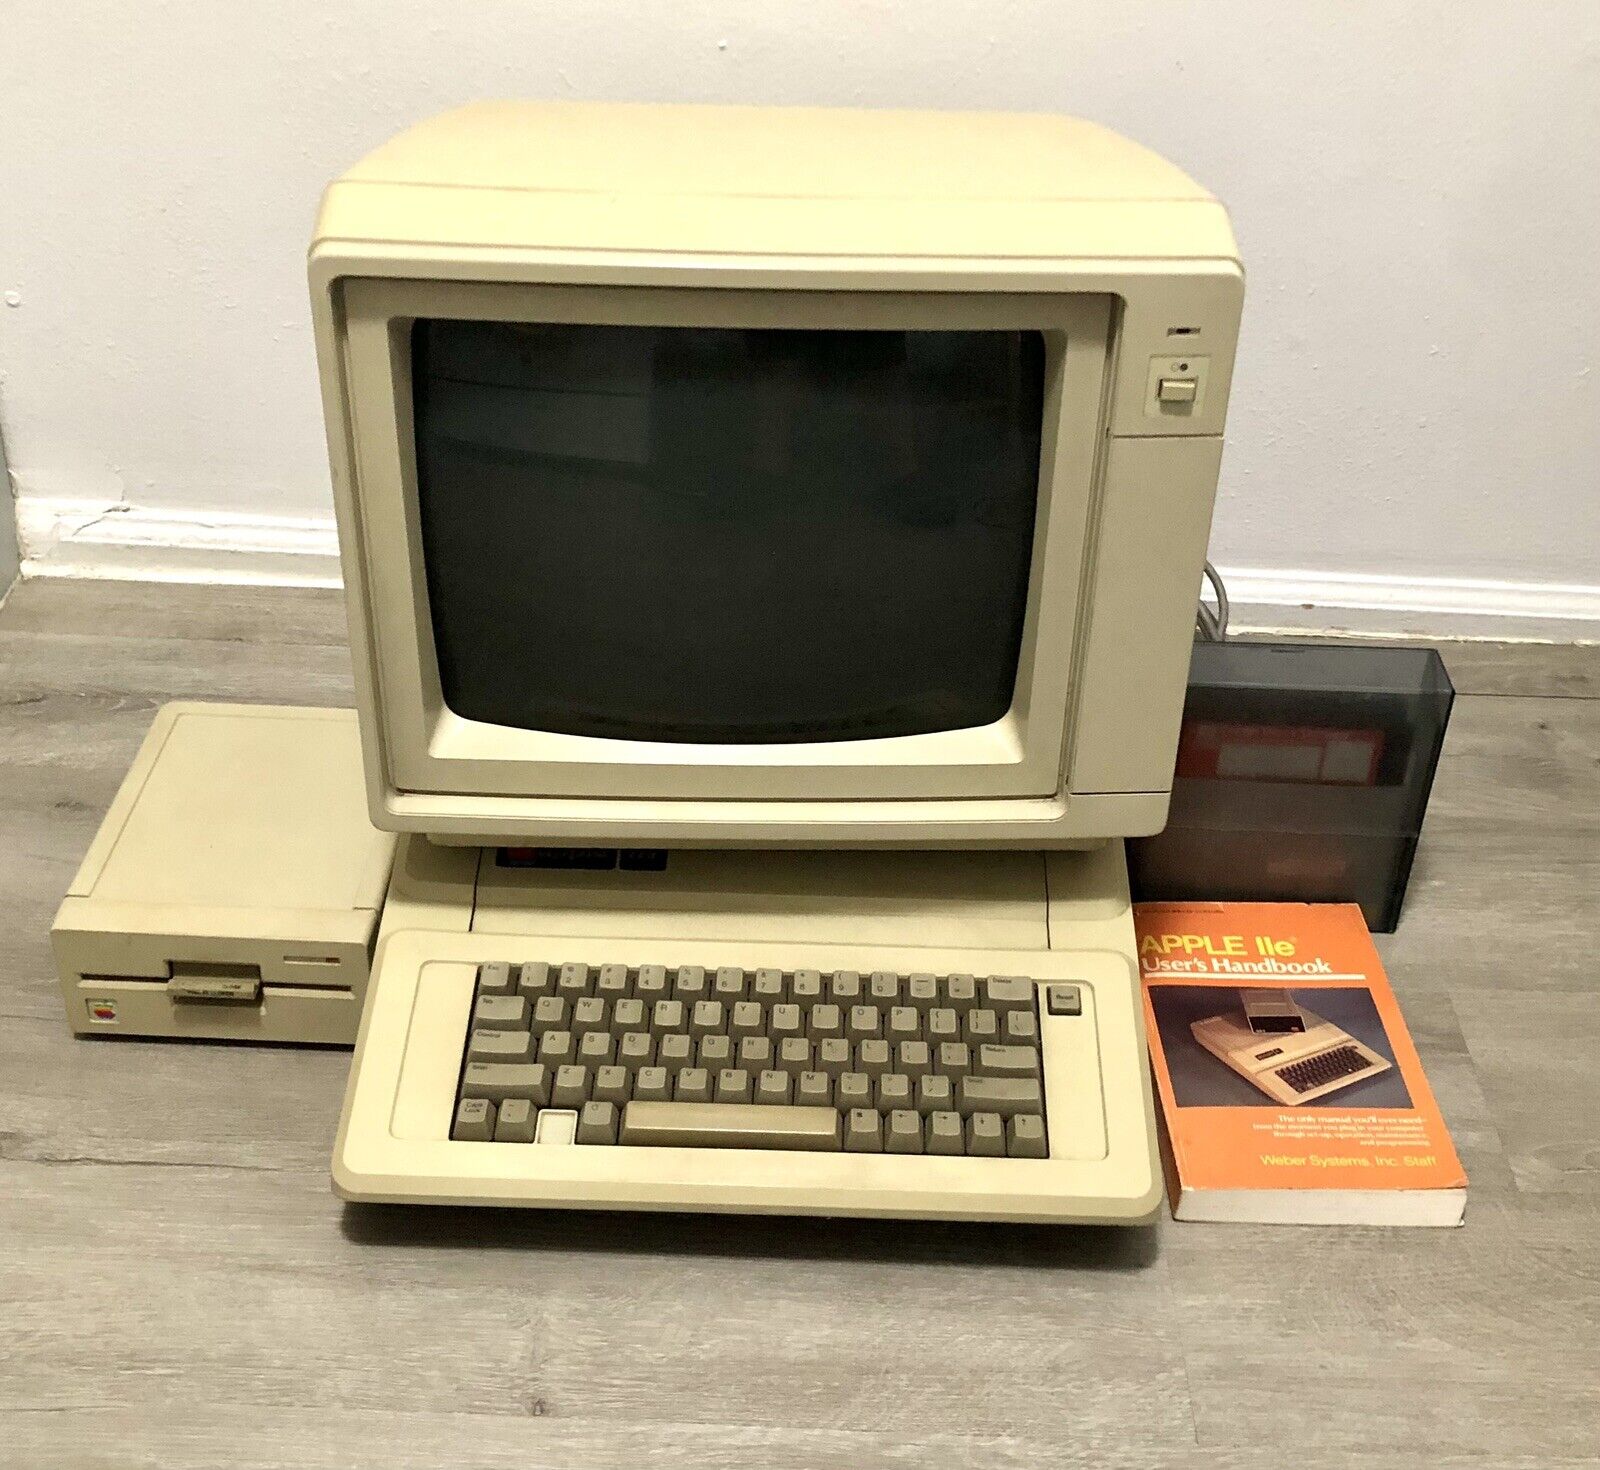 Apple IIe A2S2064 Vintage Personal Computer Bundle W/Samsung Monitor And More